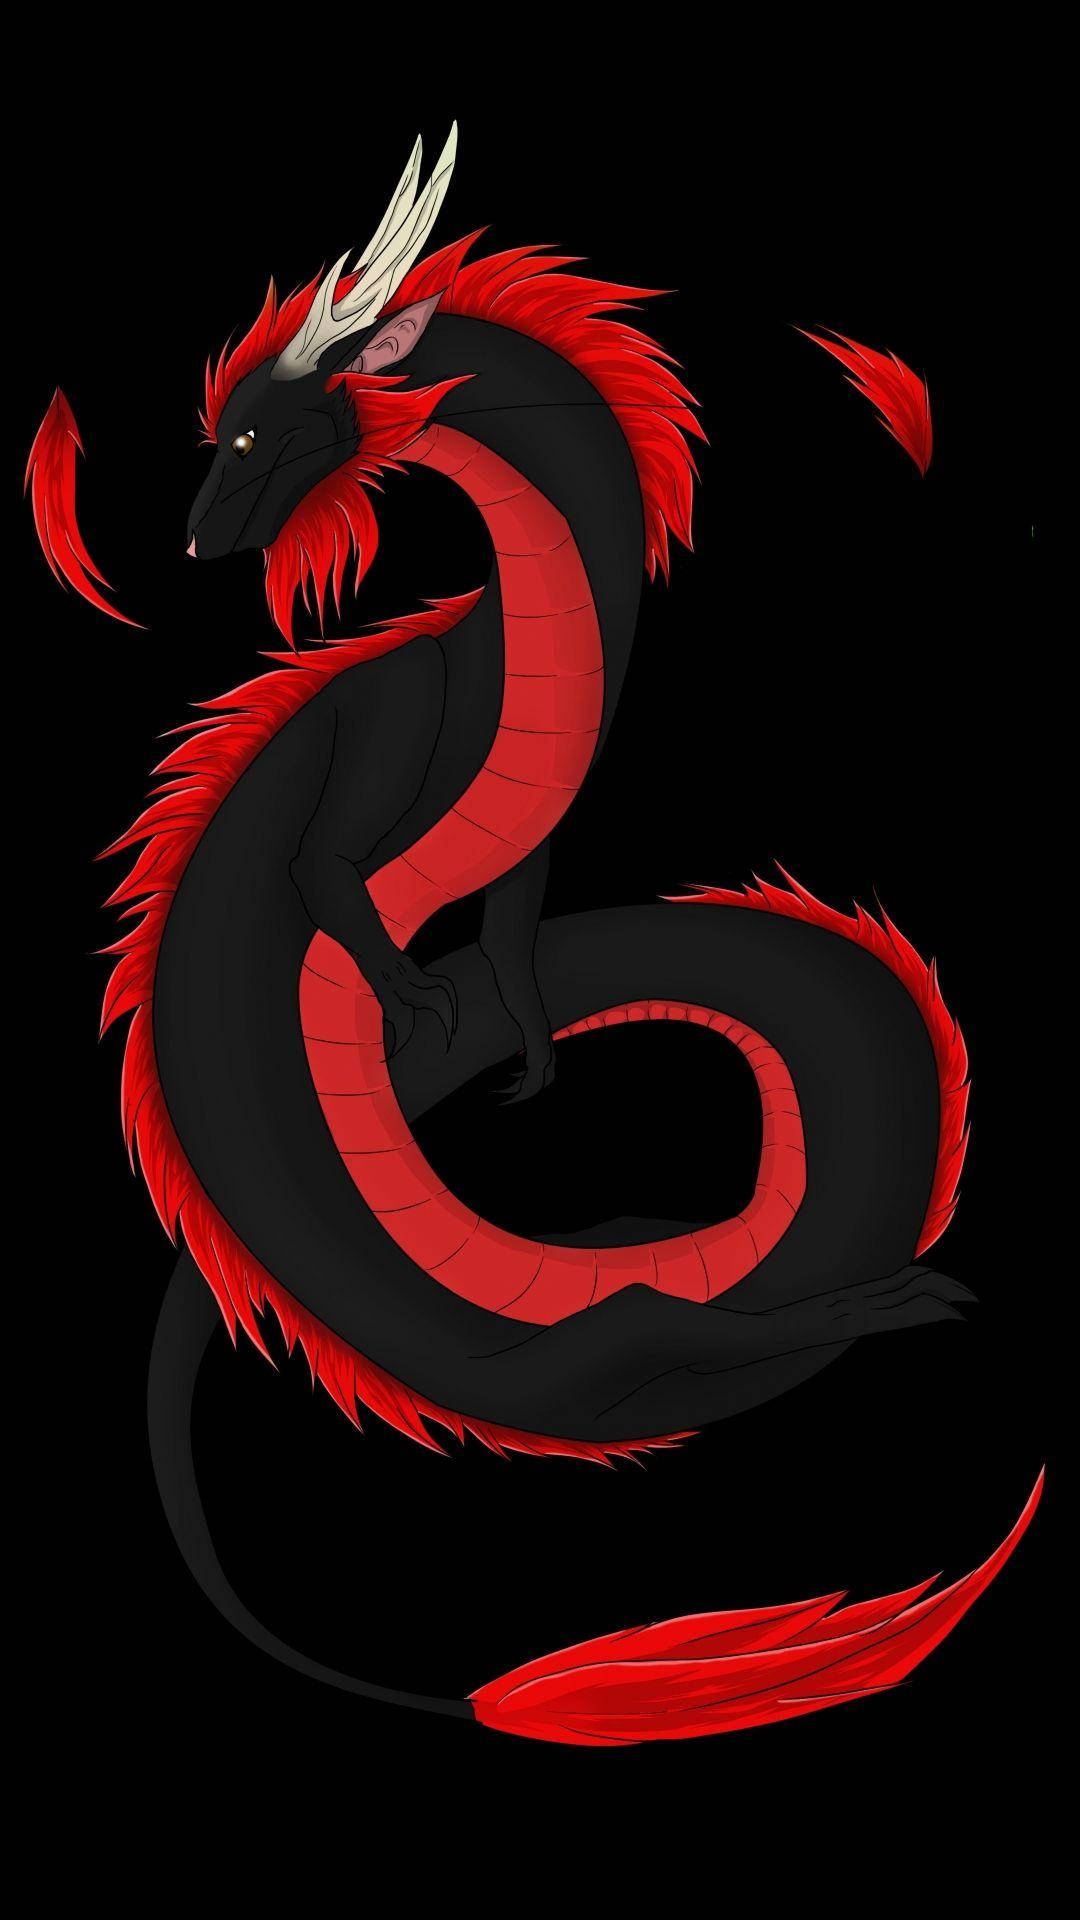 Red And Black Dragon For Iphone Screens Wallpaper